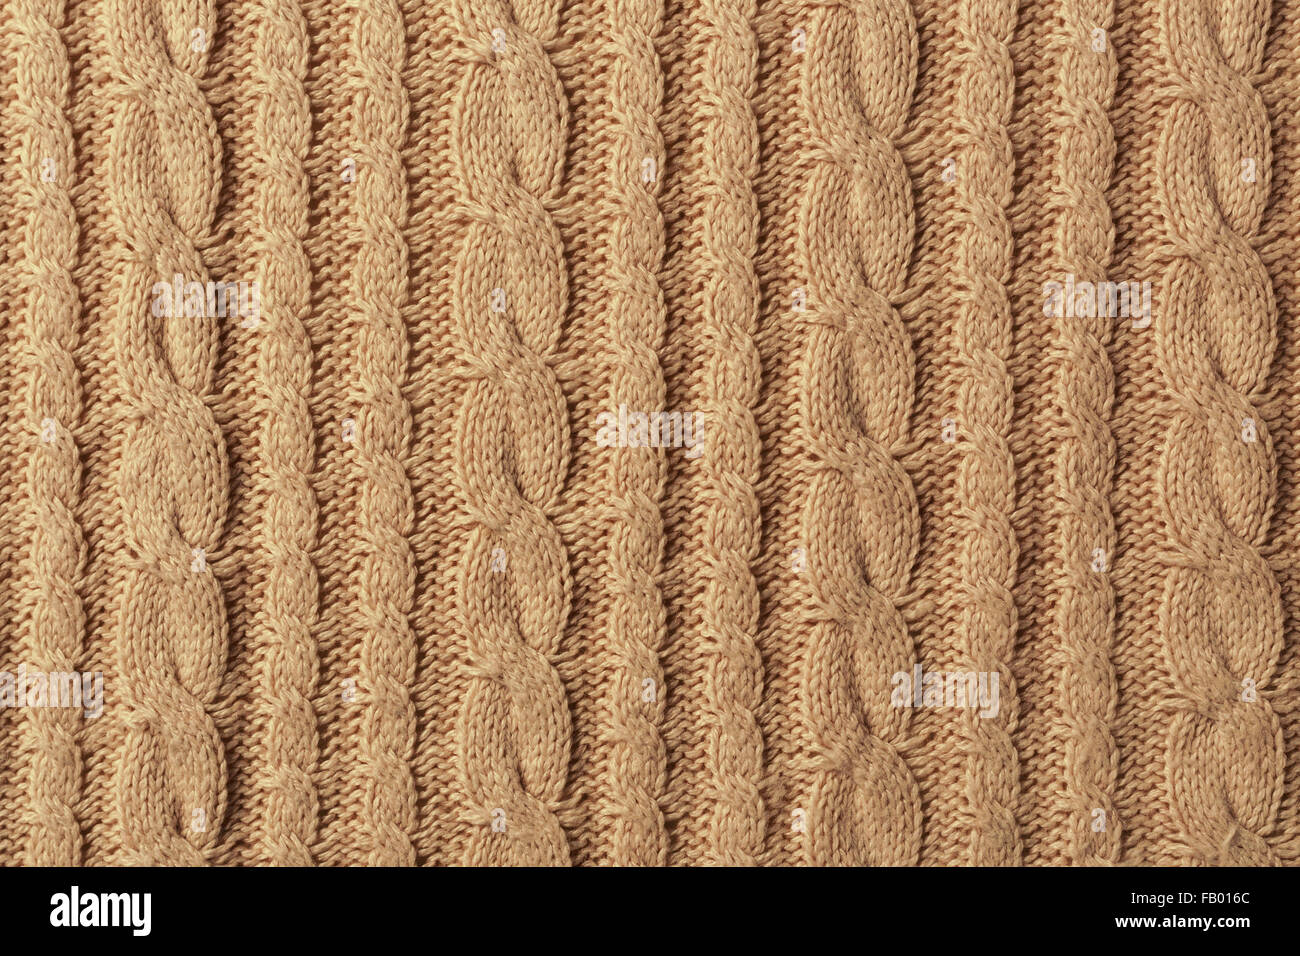 Knit Texture Of Light Natural Wool Knitted Fabric With Cable